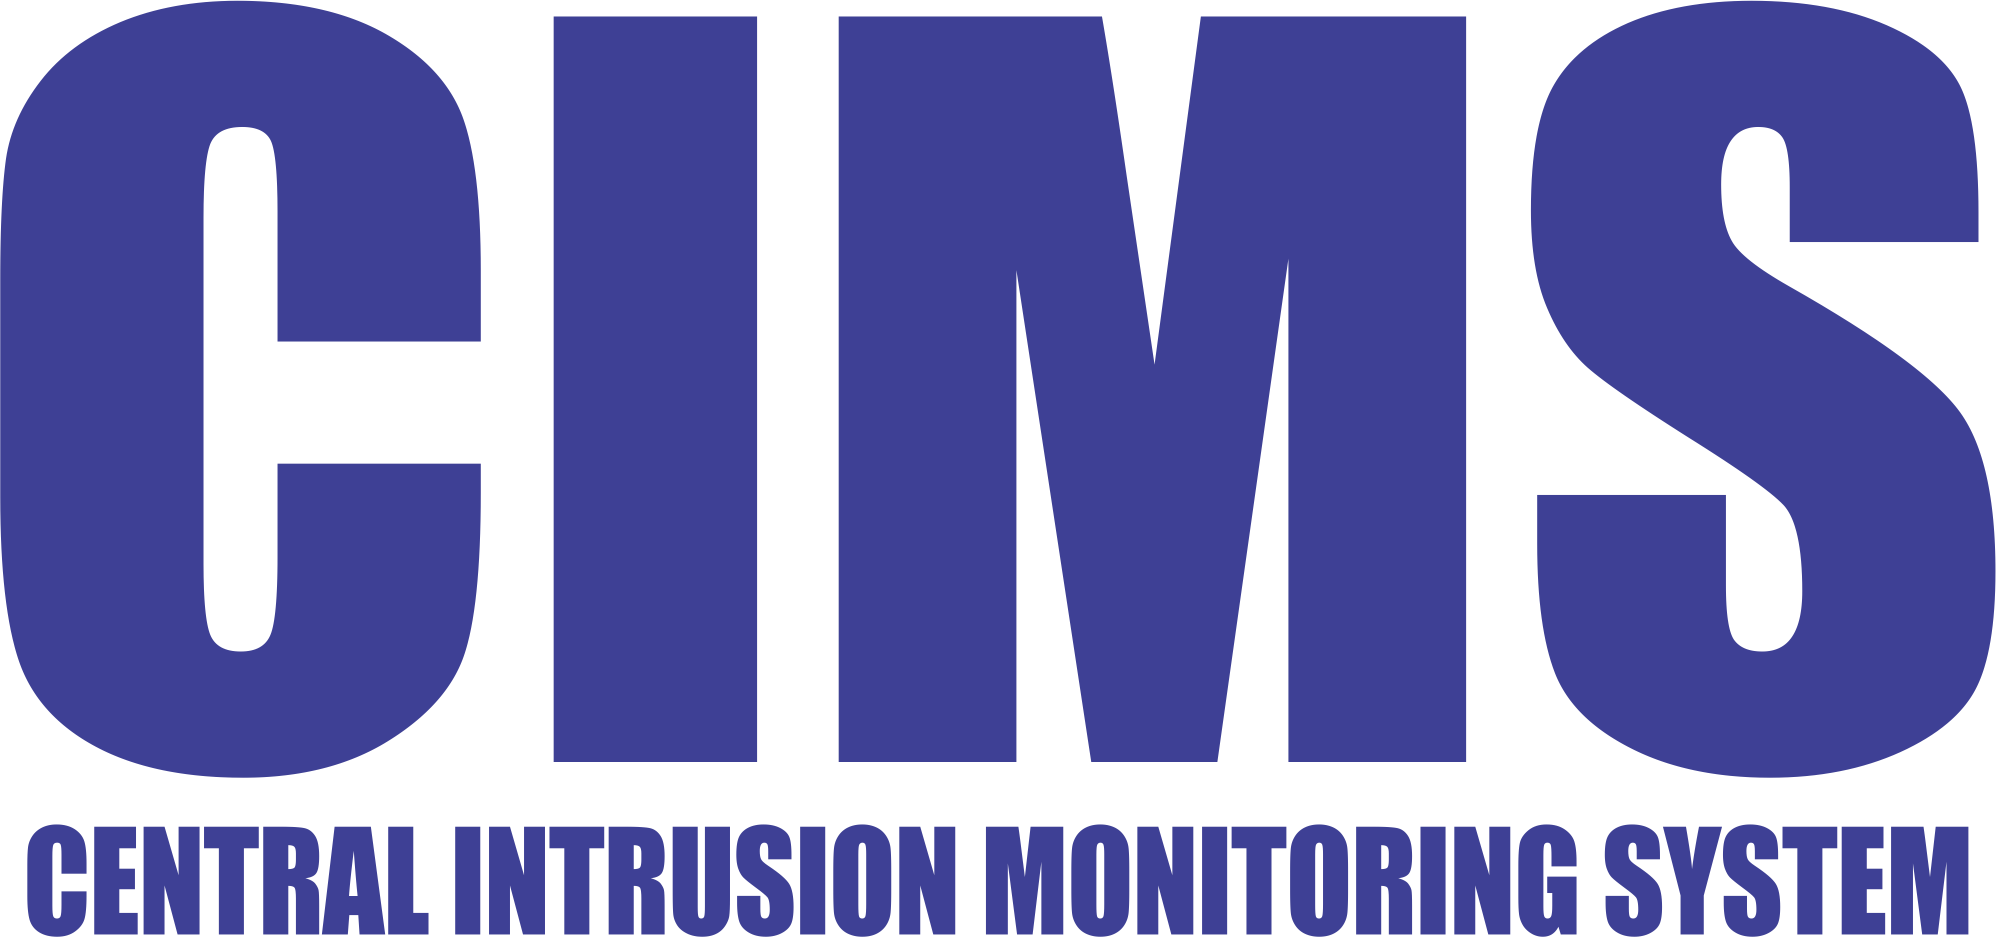 CIMS (CENTRAL INTRUSION MONITORING SYSTEM)